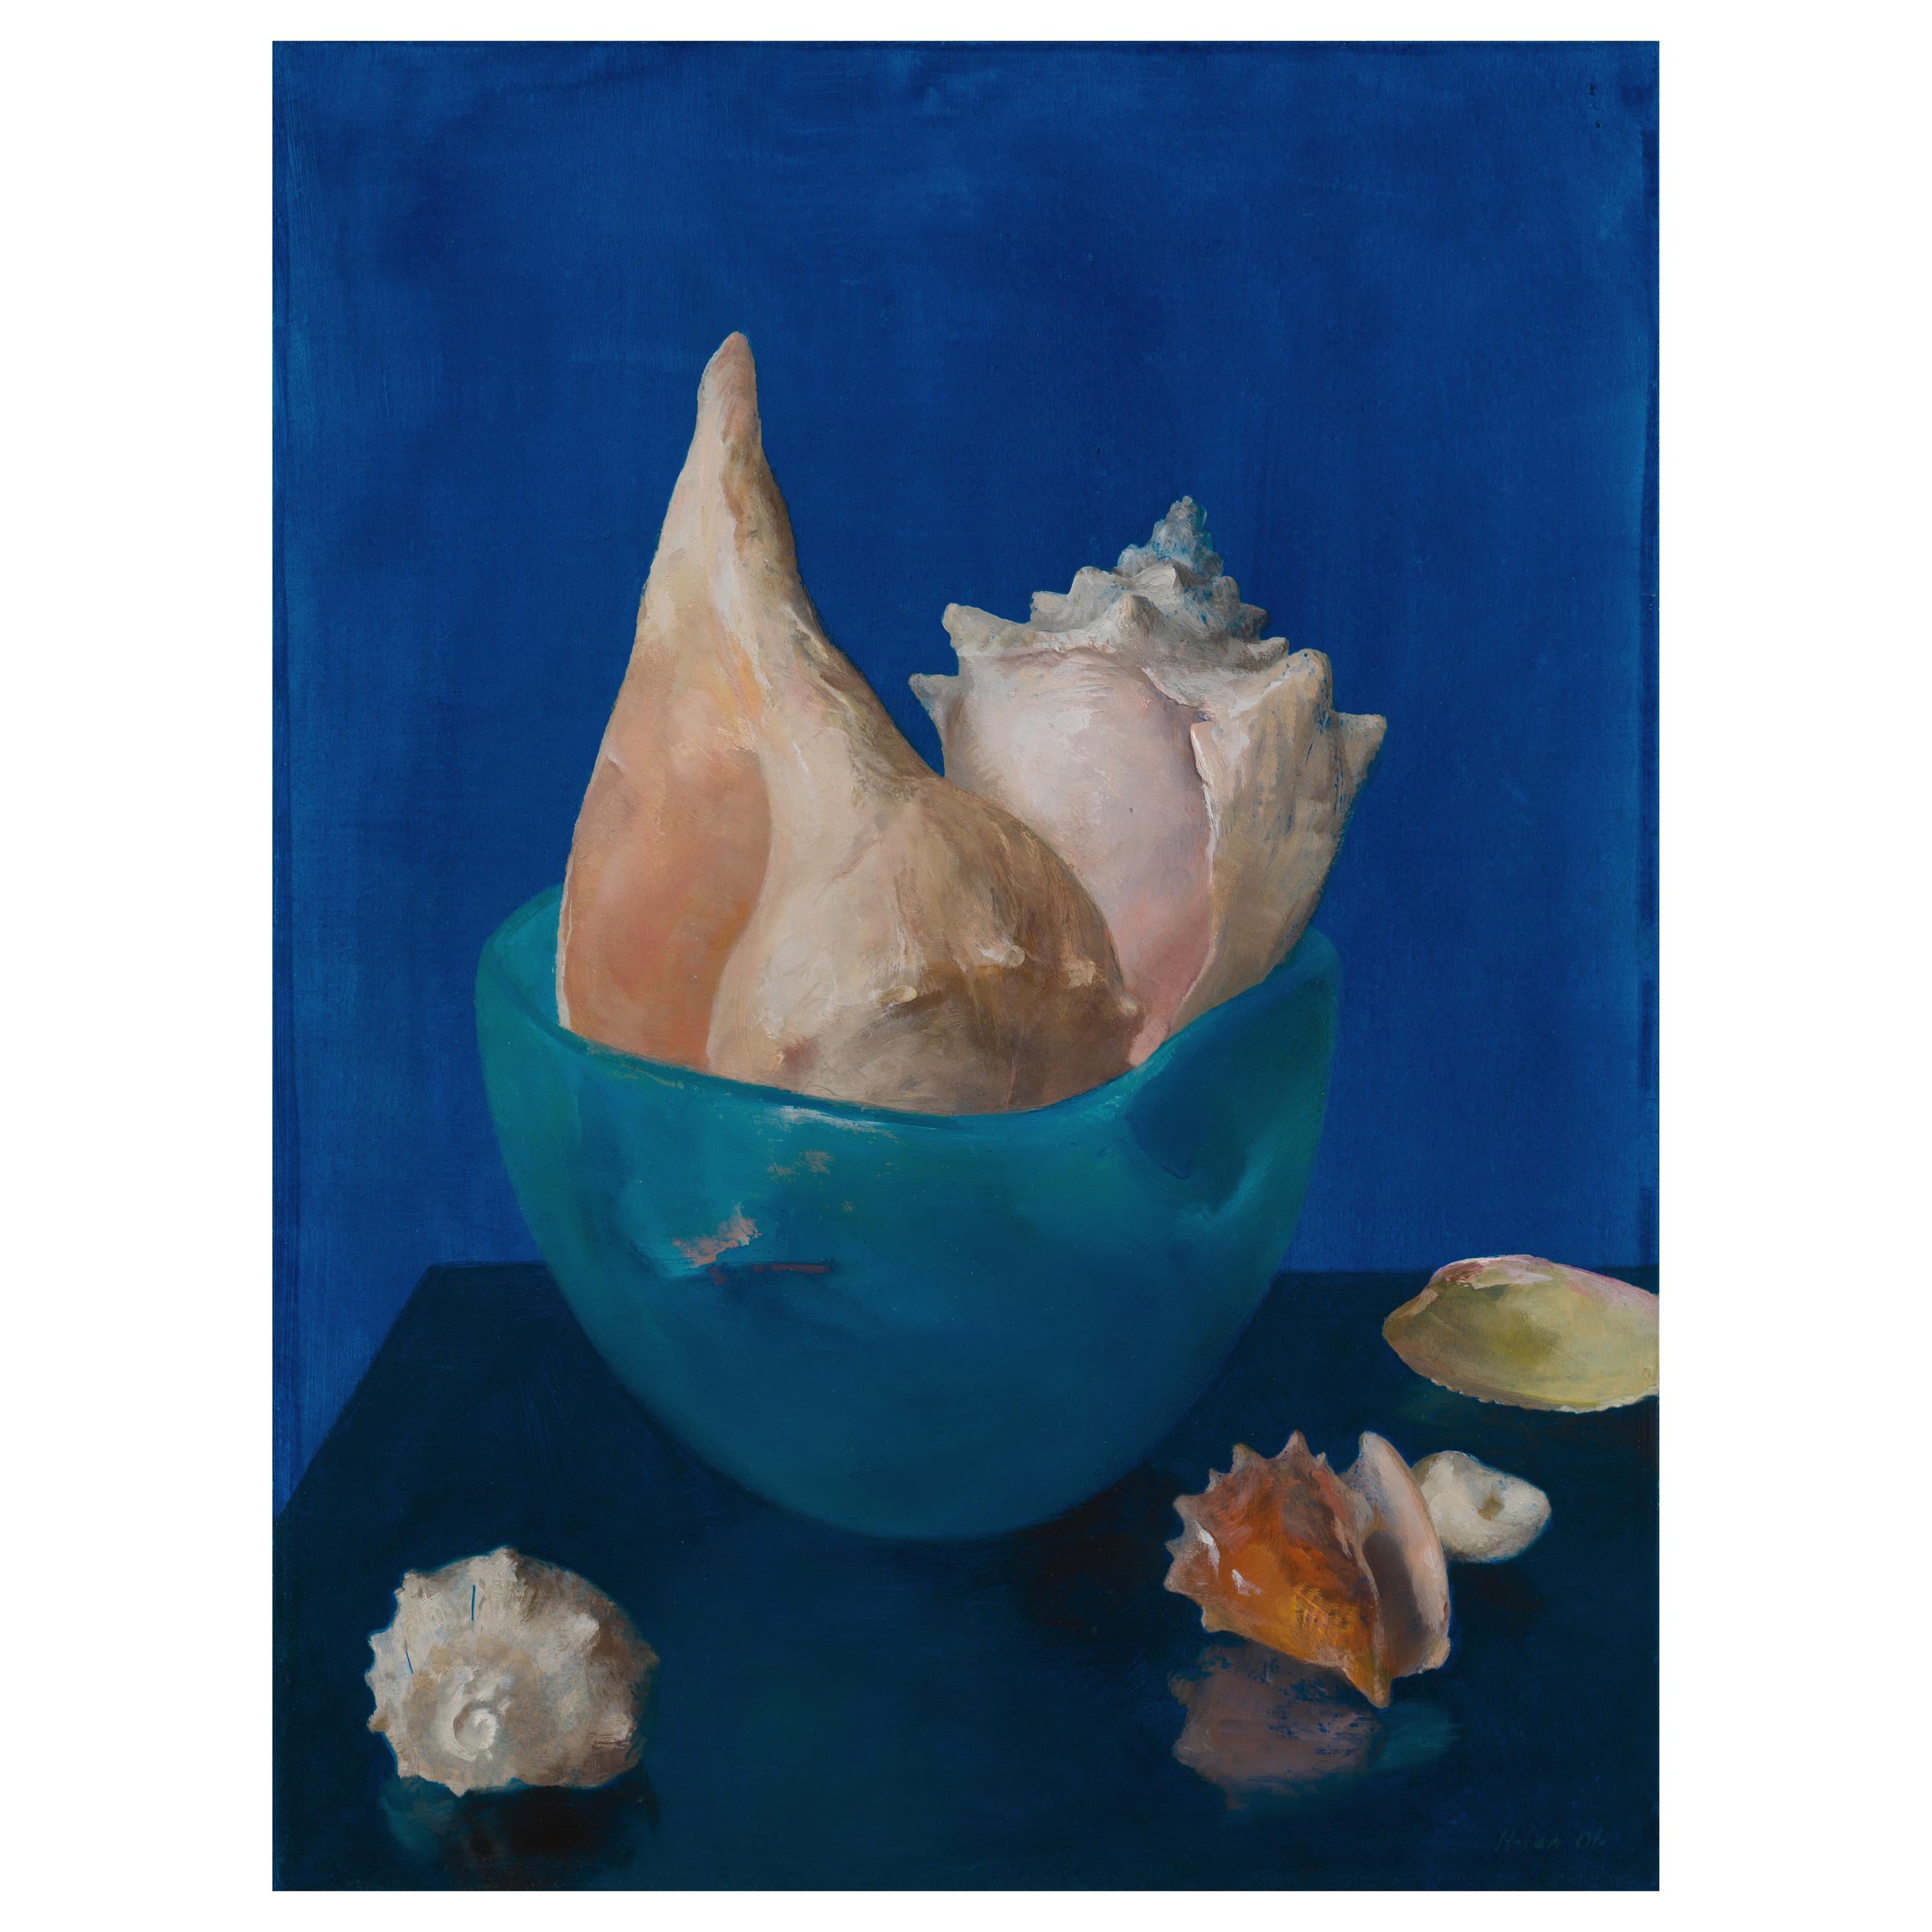 Sea Shells in Blue, Oil on Panel Still Life Painting with Seashell Collection